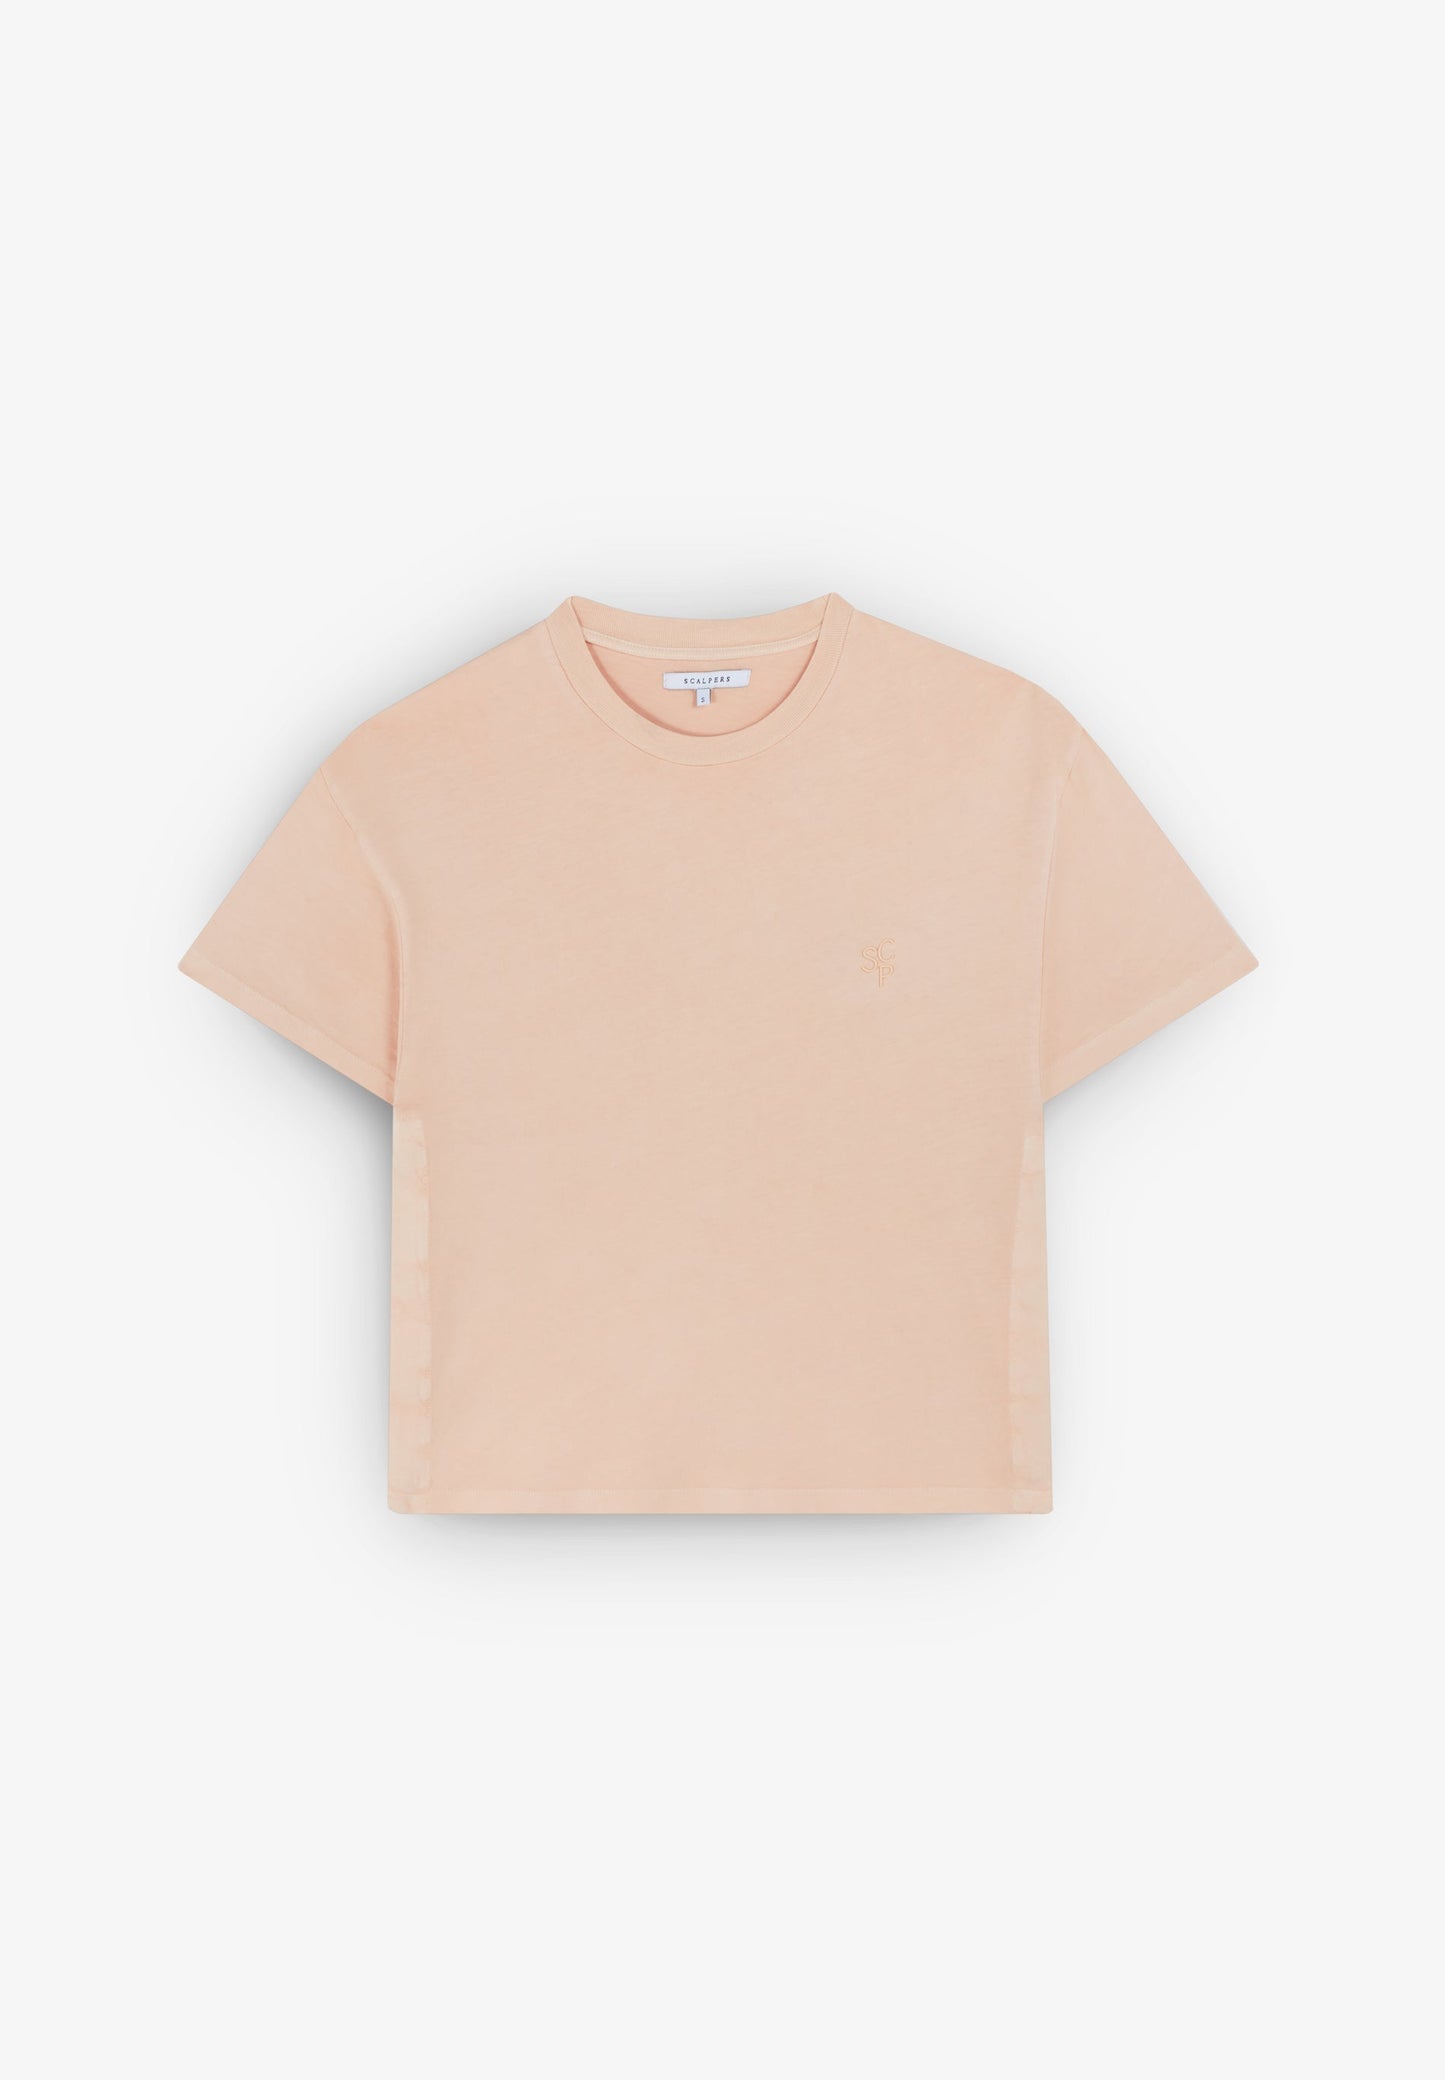 T-SHIRT WITH SIDE SNAP BUTTONS